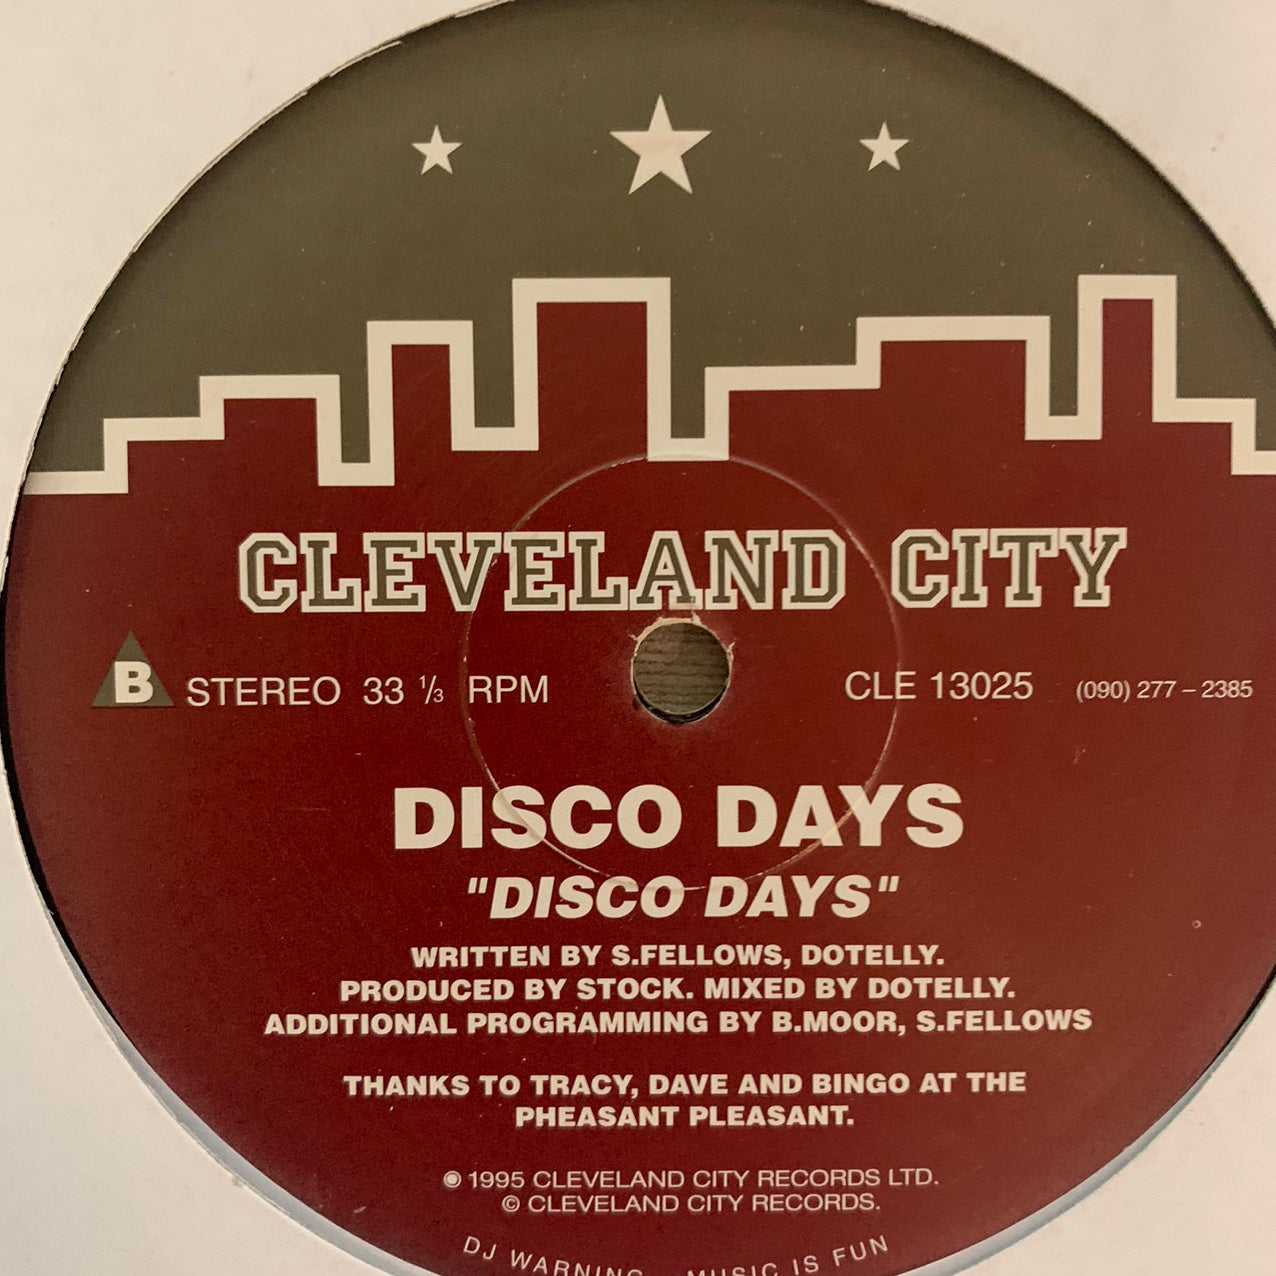 Disco Days “Dub Days” / “Disco Days” on the iconic House Music Label Cleveland City 2 Track 12inch Vinyl